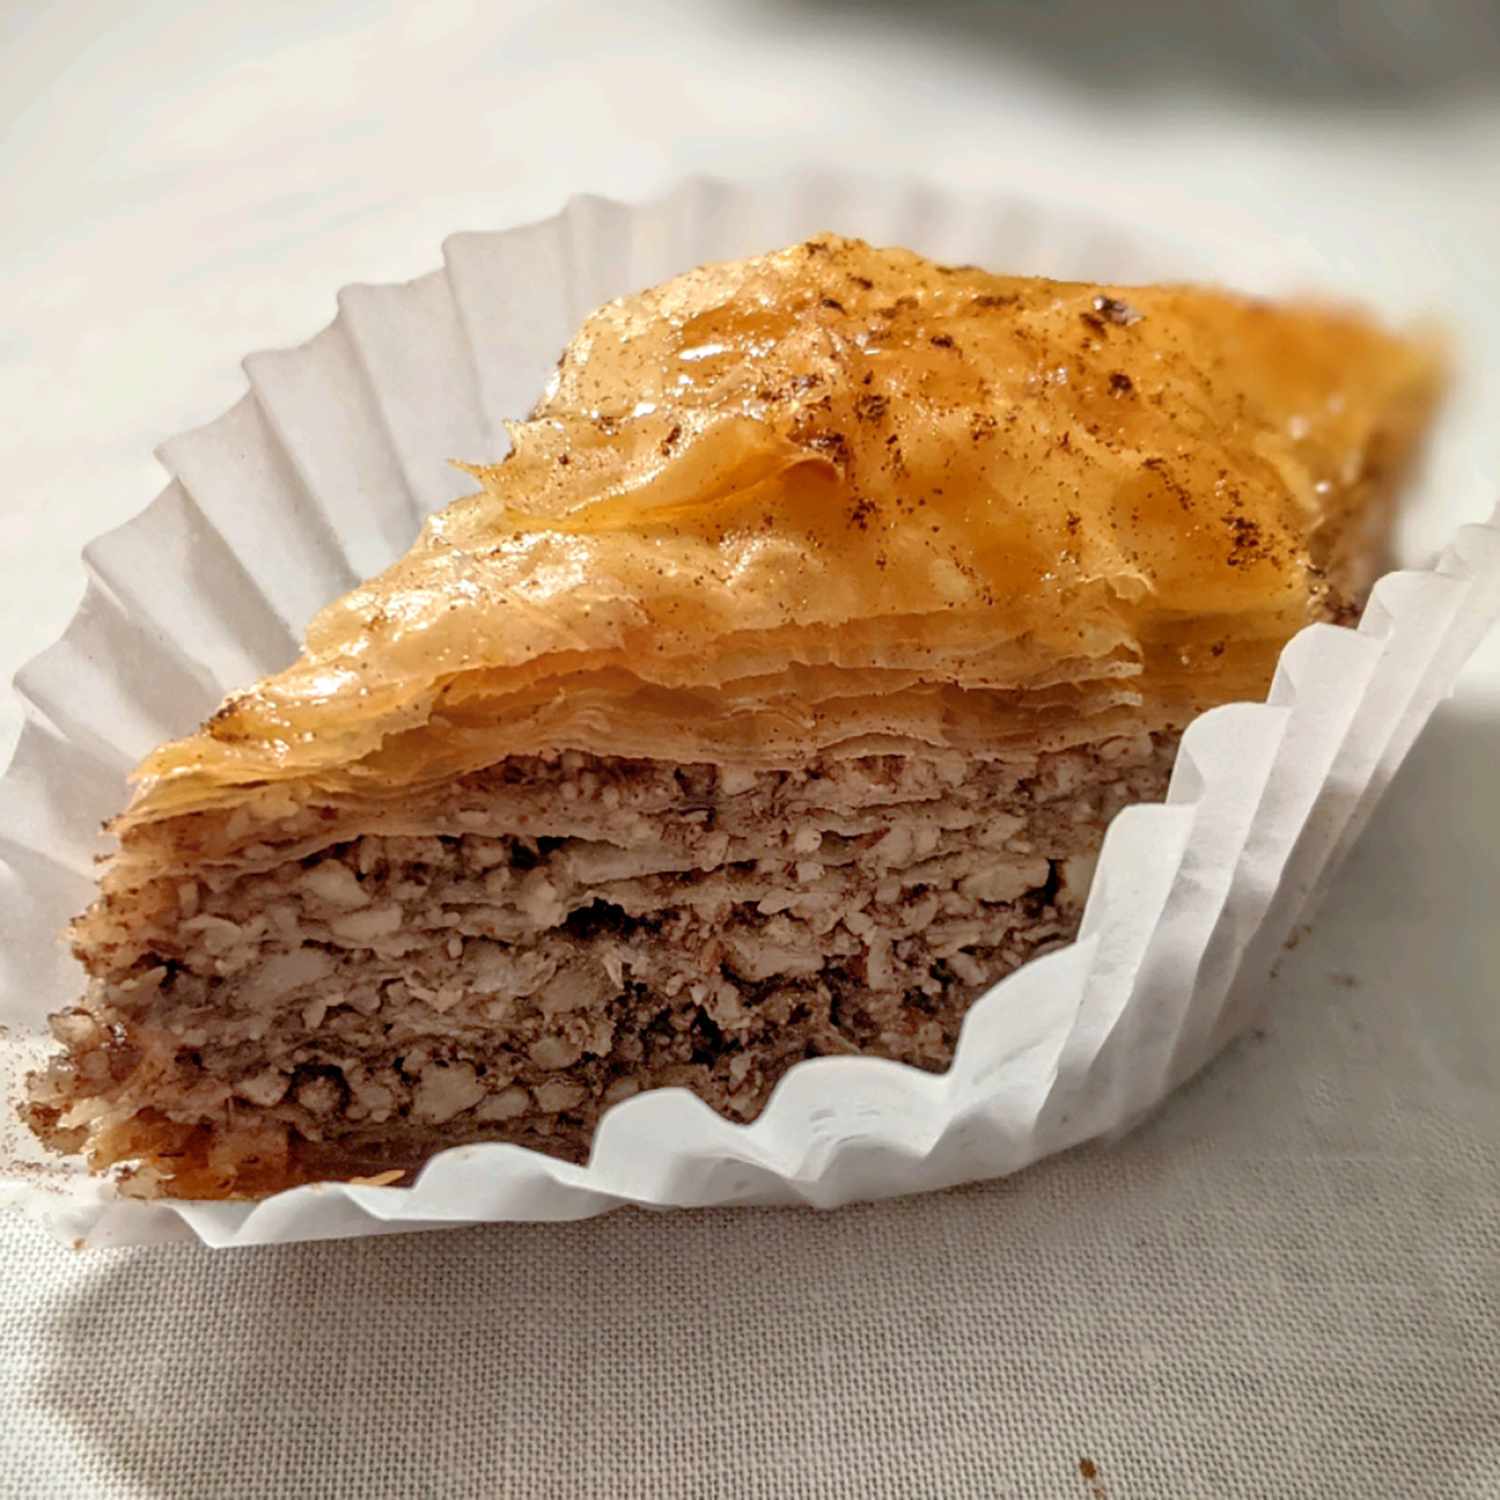 a close up view of a single piece of baklava and it's super flaky layers